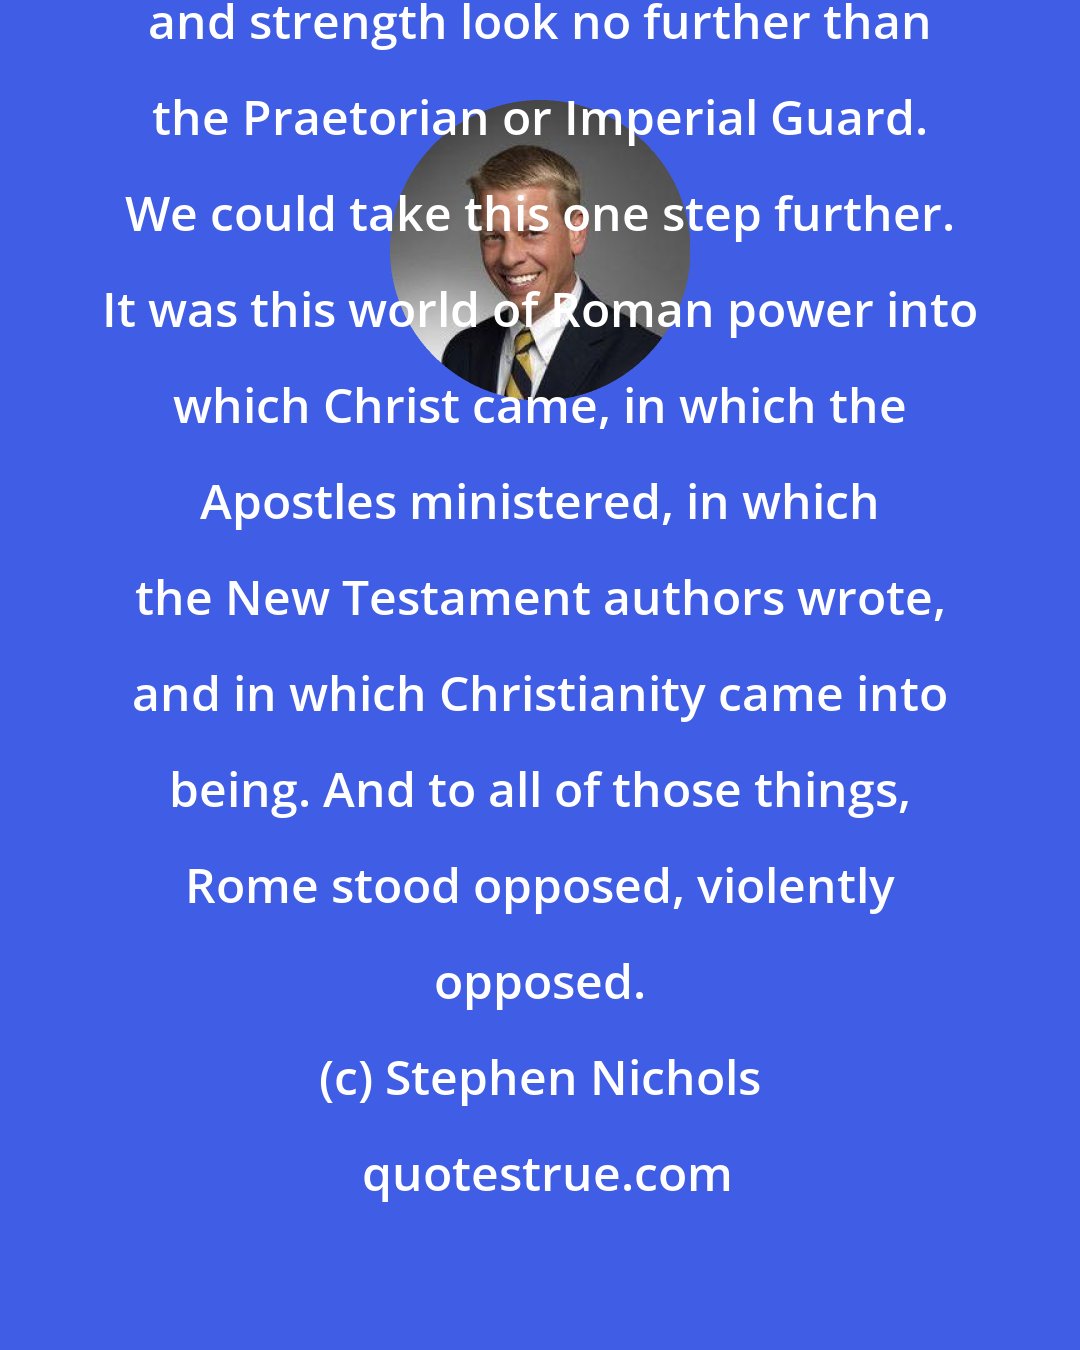 Stephen Nichols: If you want a symbol of Roman power and strength look no further than the Praetorian or Imperial Guard. We could take this one step further. It was this world of Roman power into which Christ came, in which the Apostles ministered, in which the New Testament authors wrote, and in which Christianity came into being. And to all of those things, Rome stood opposed, violently opposed.